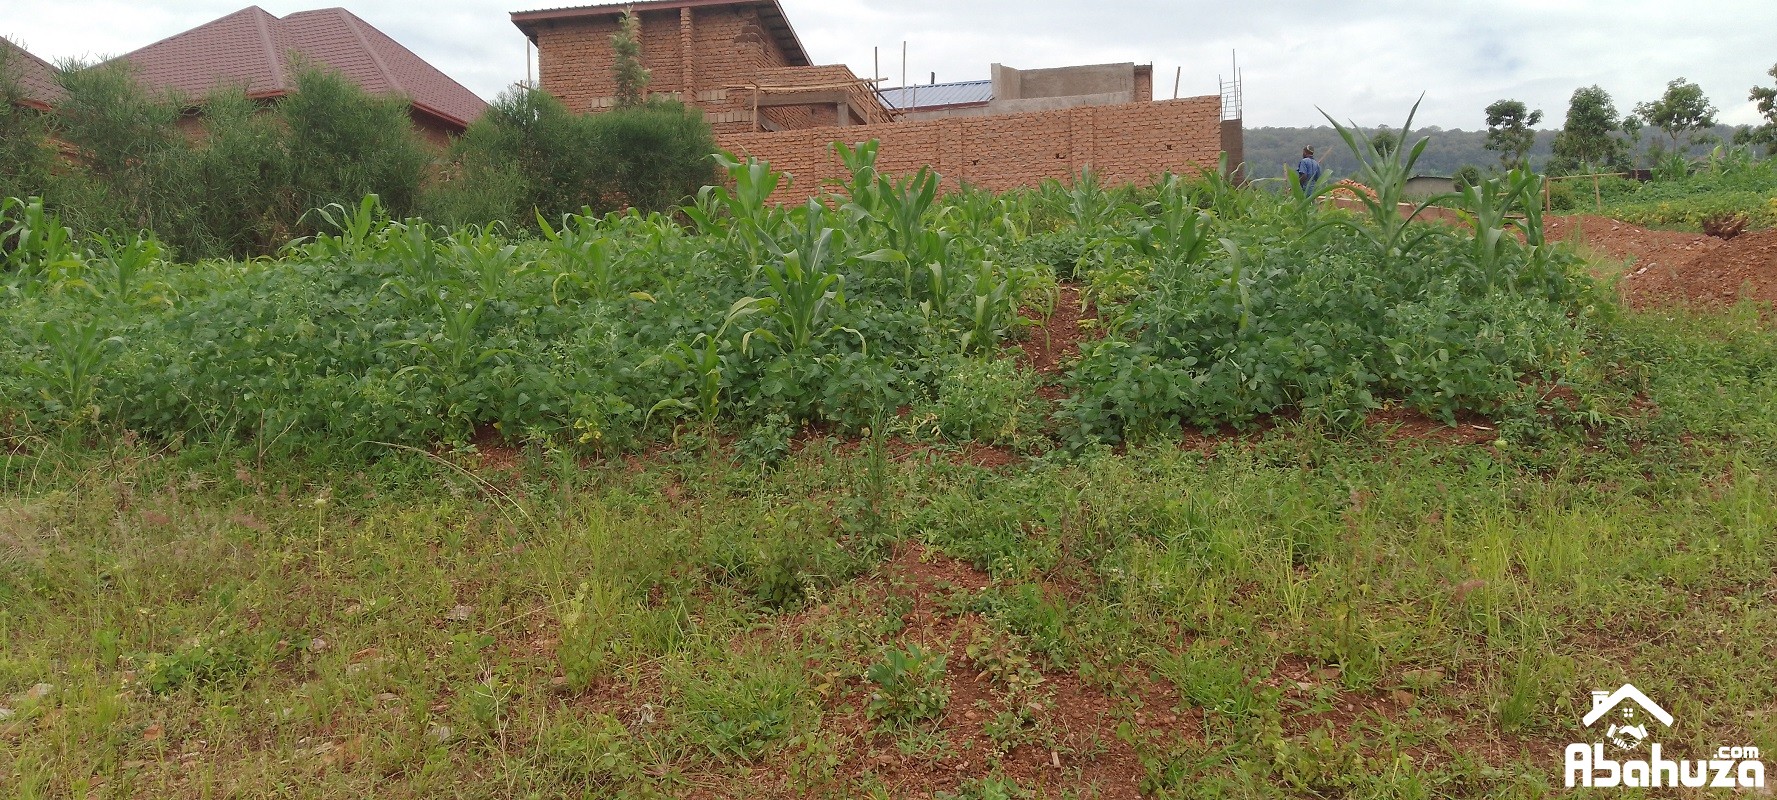 A  PLOT FOR SALE IN RESIDENTIAL SITE OF KARAMA AT KIGALI-Gisenga